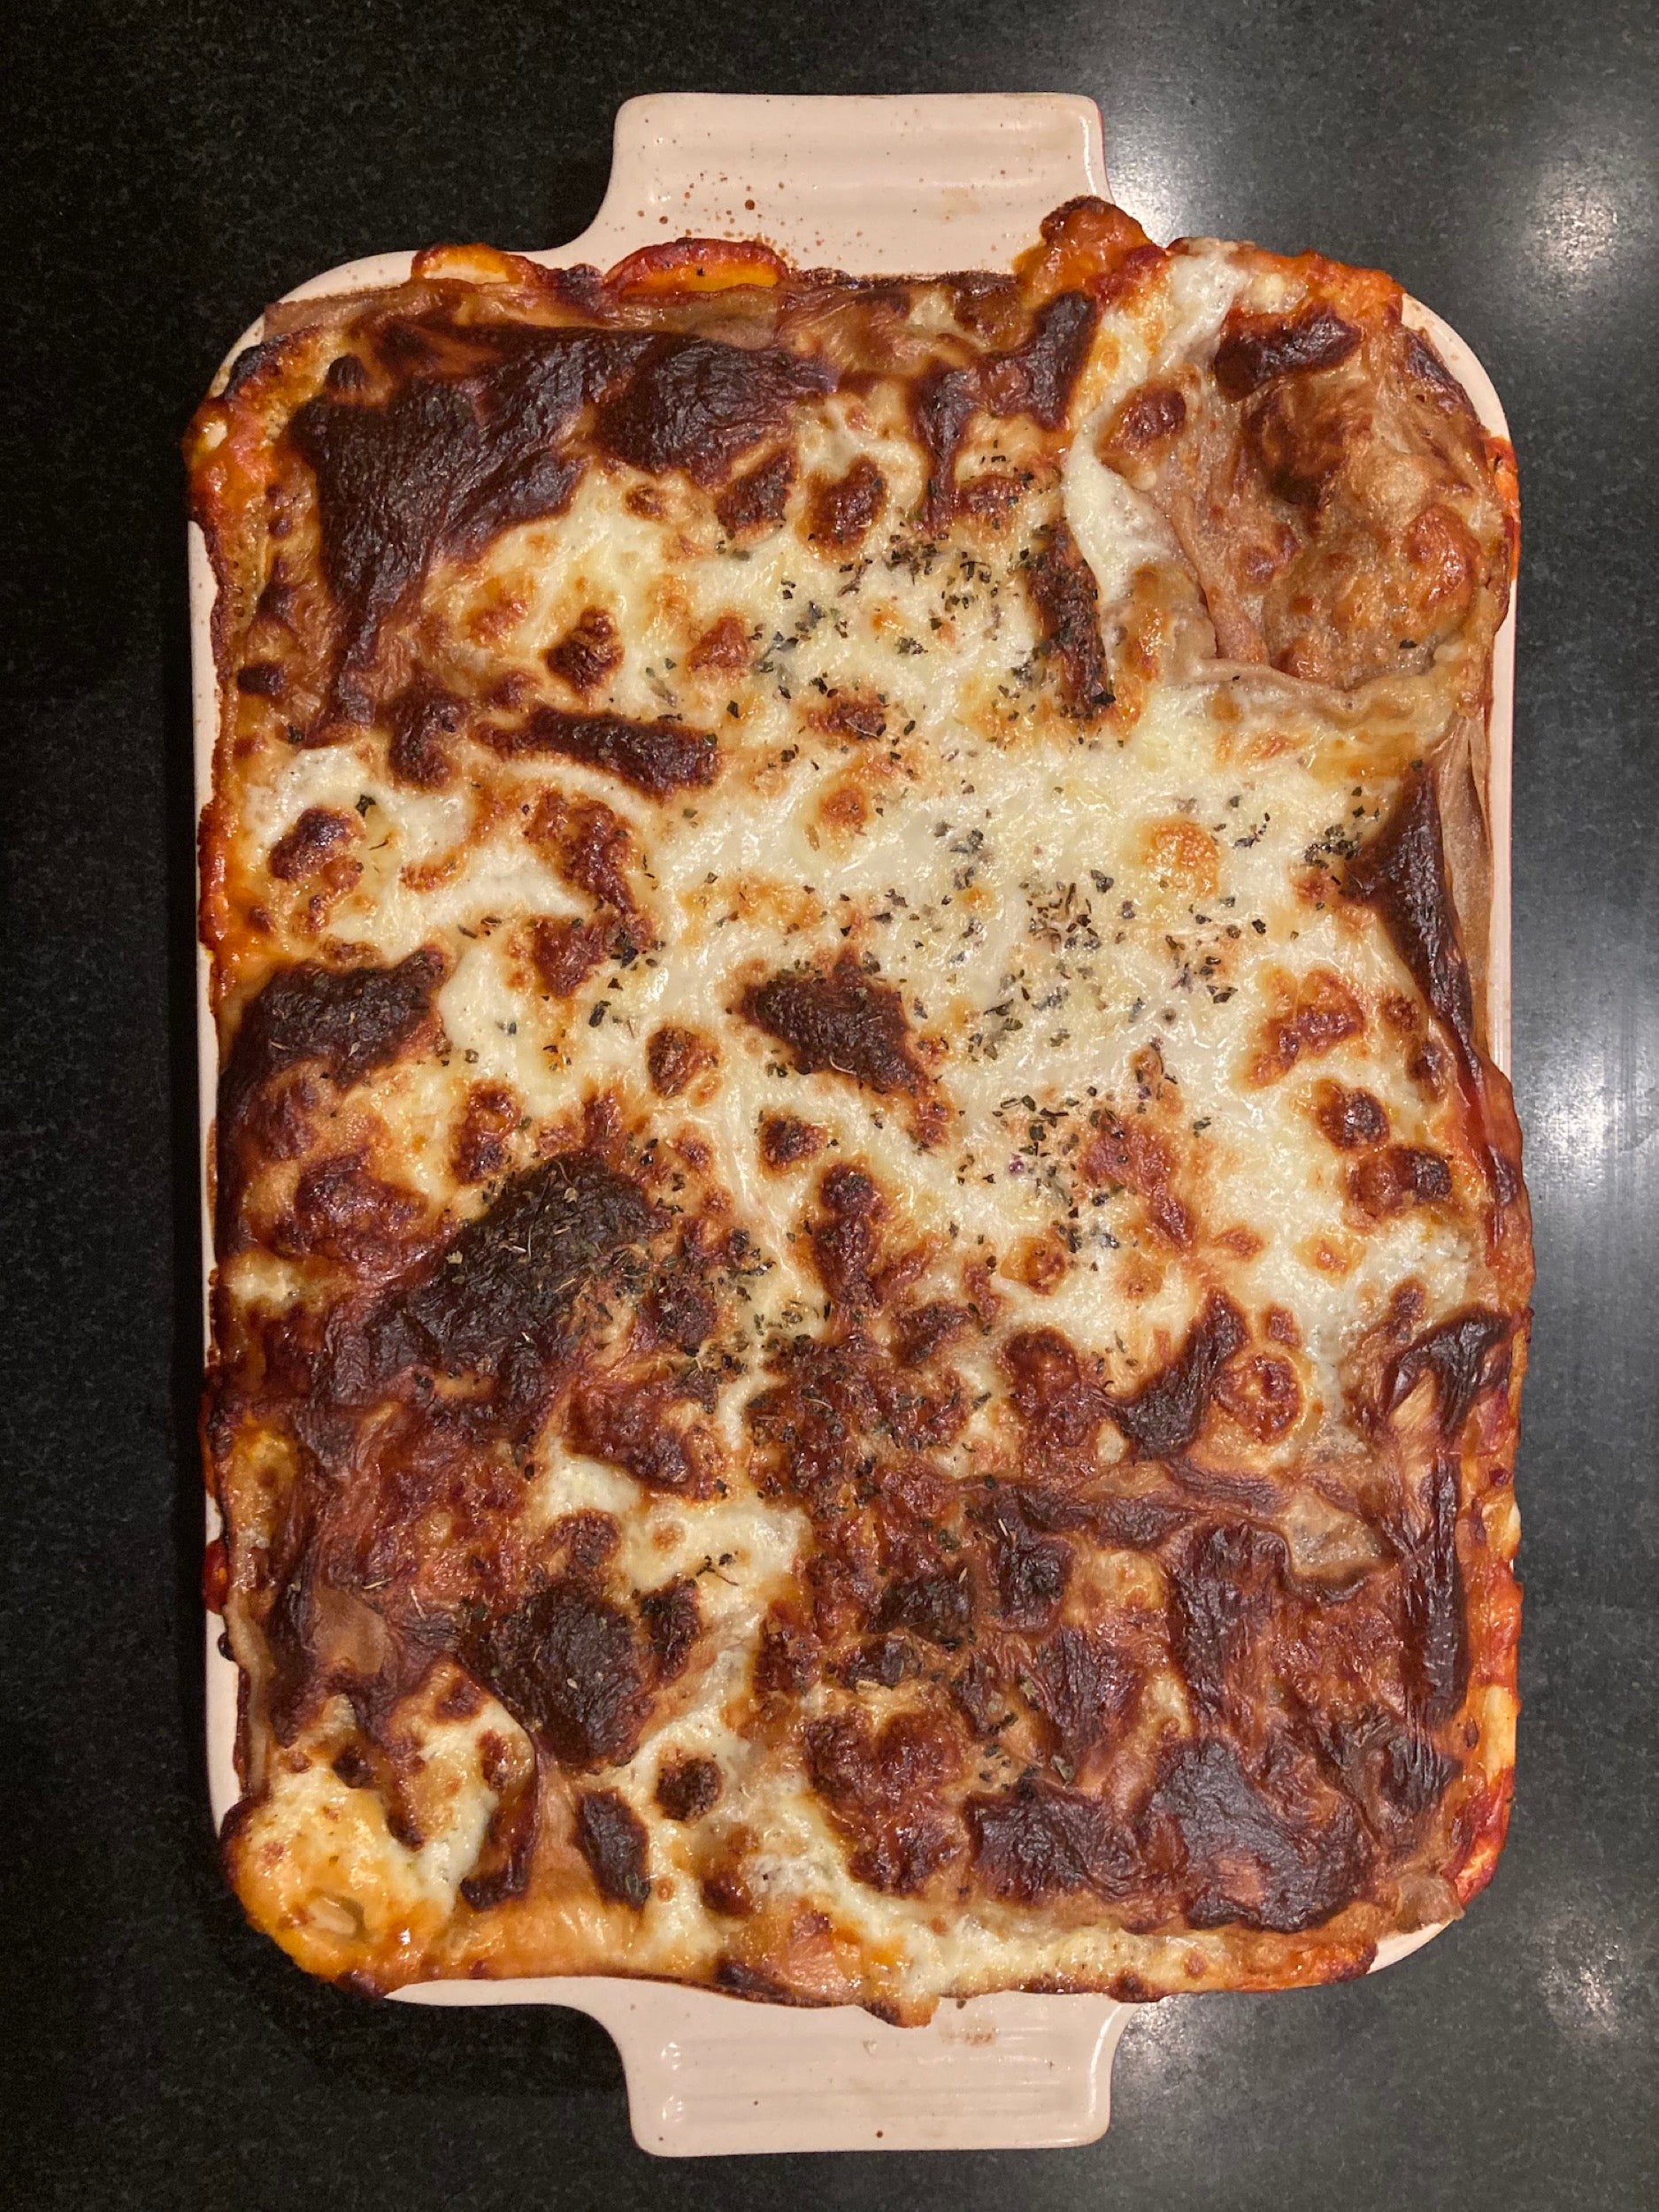 Lasagne with homemade pasta and spent grain flour (any variant)